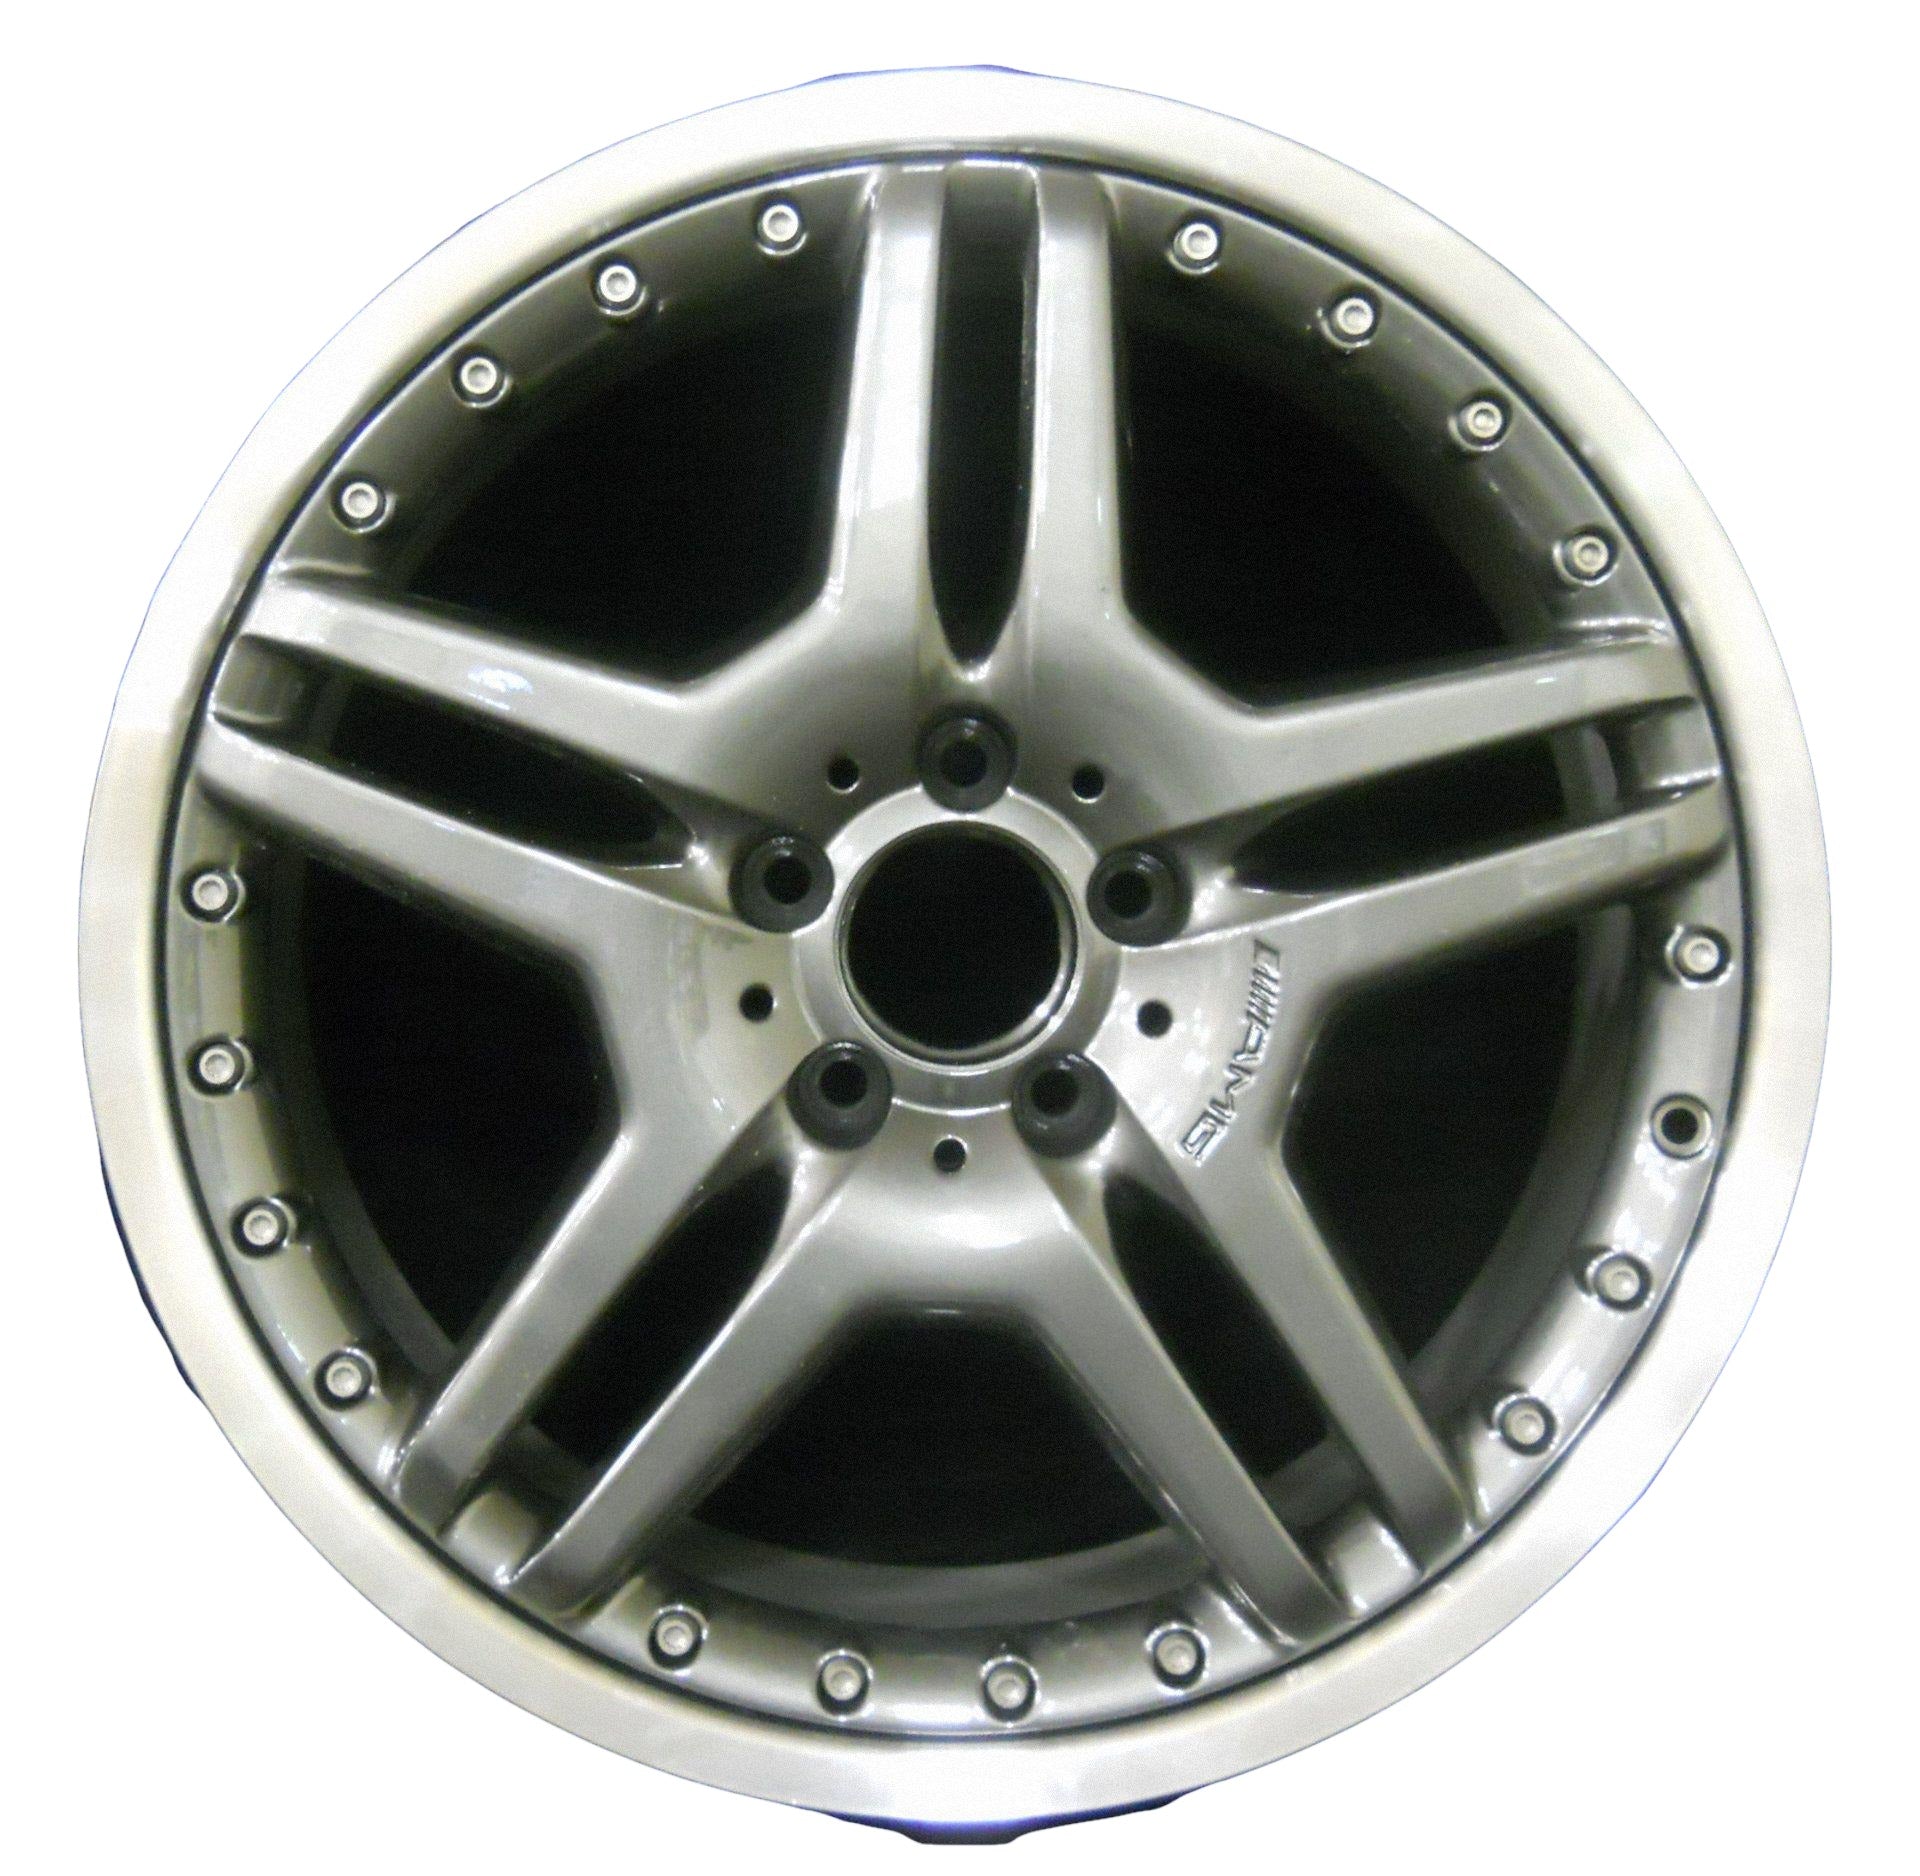 Mercedes CL-Class  2004, 2005 Factory OEM Car Wheel Size 19x8.5 Alloy WAO.65348FT.LC32.FC